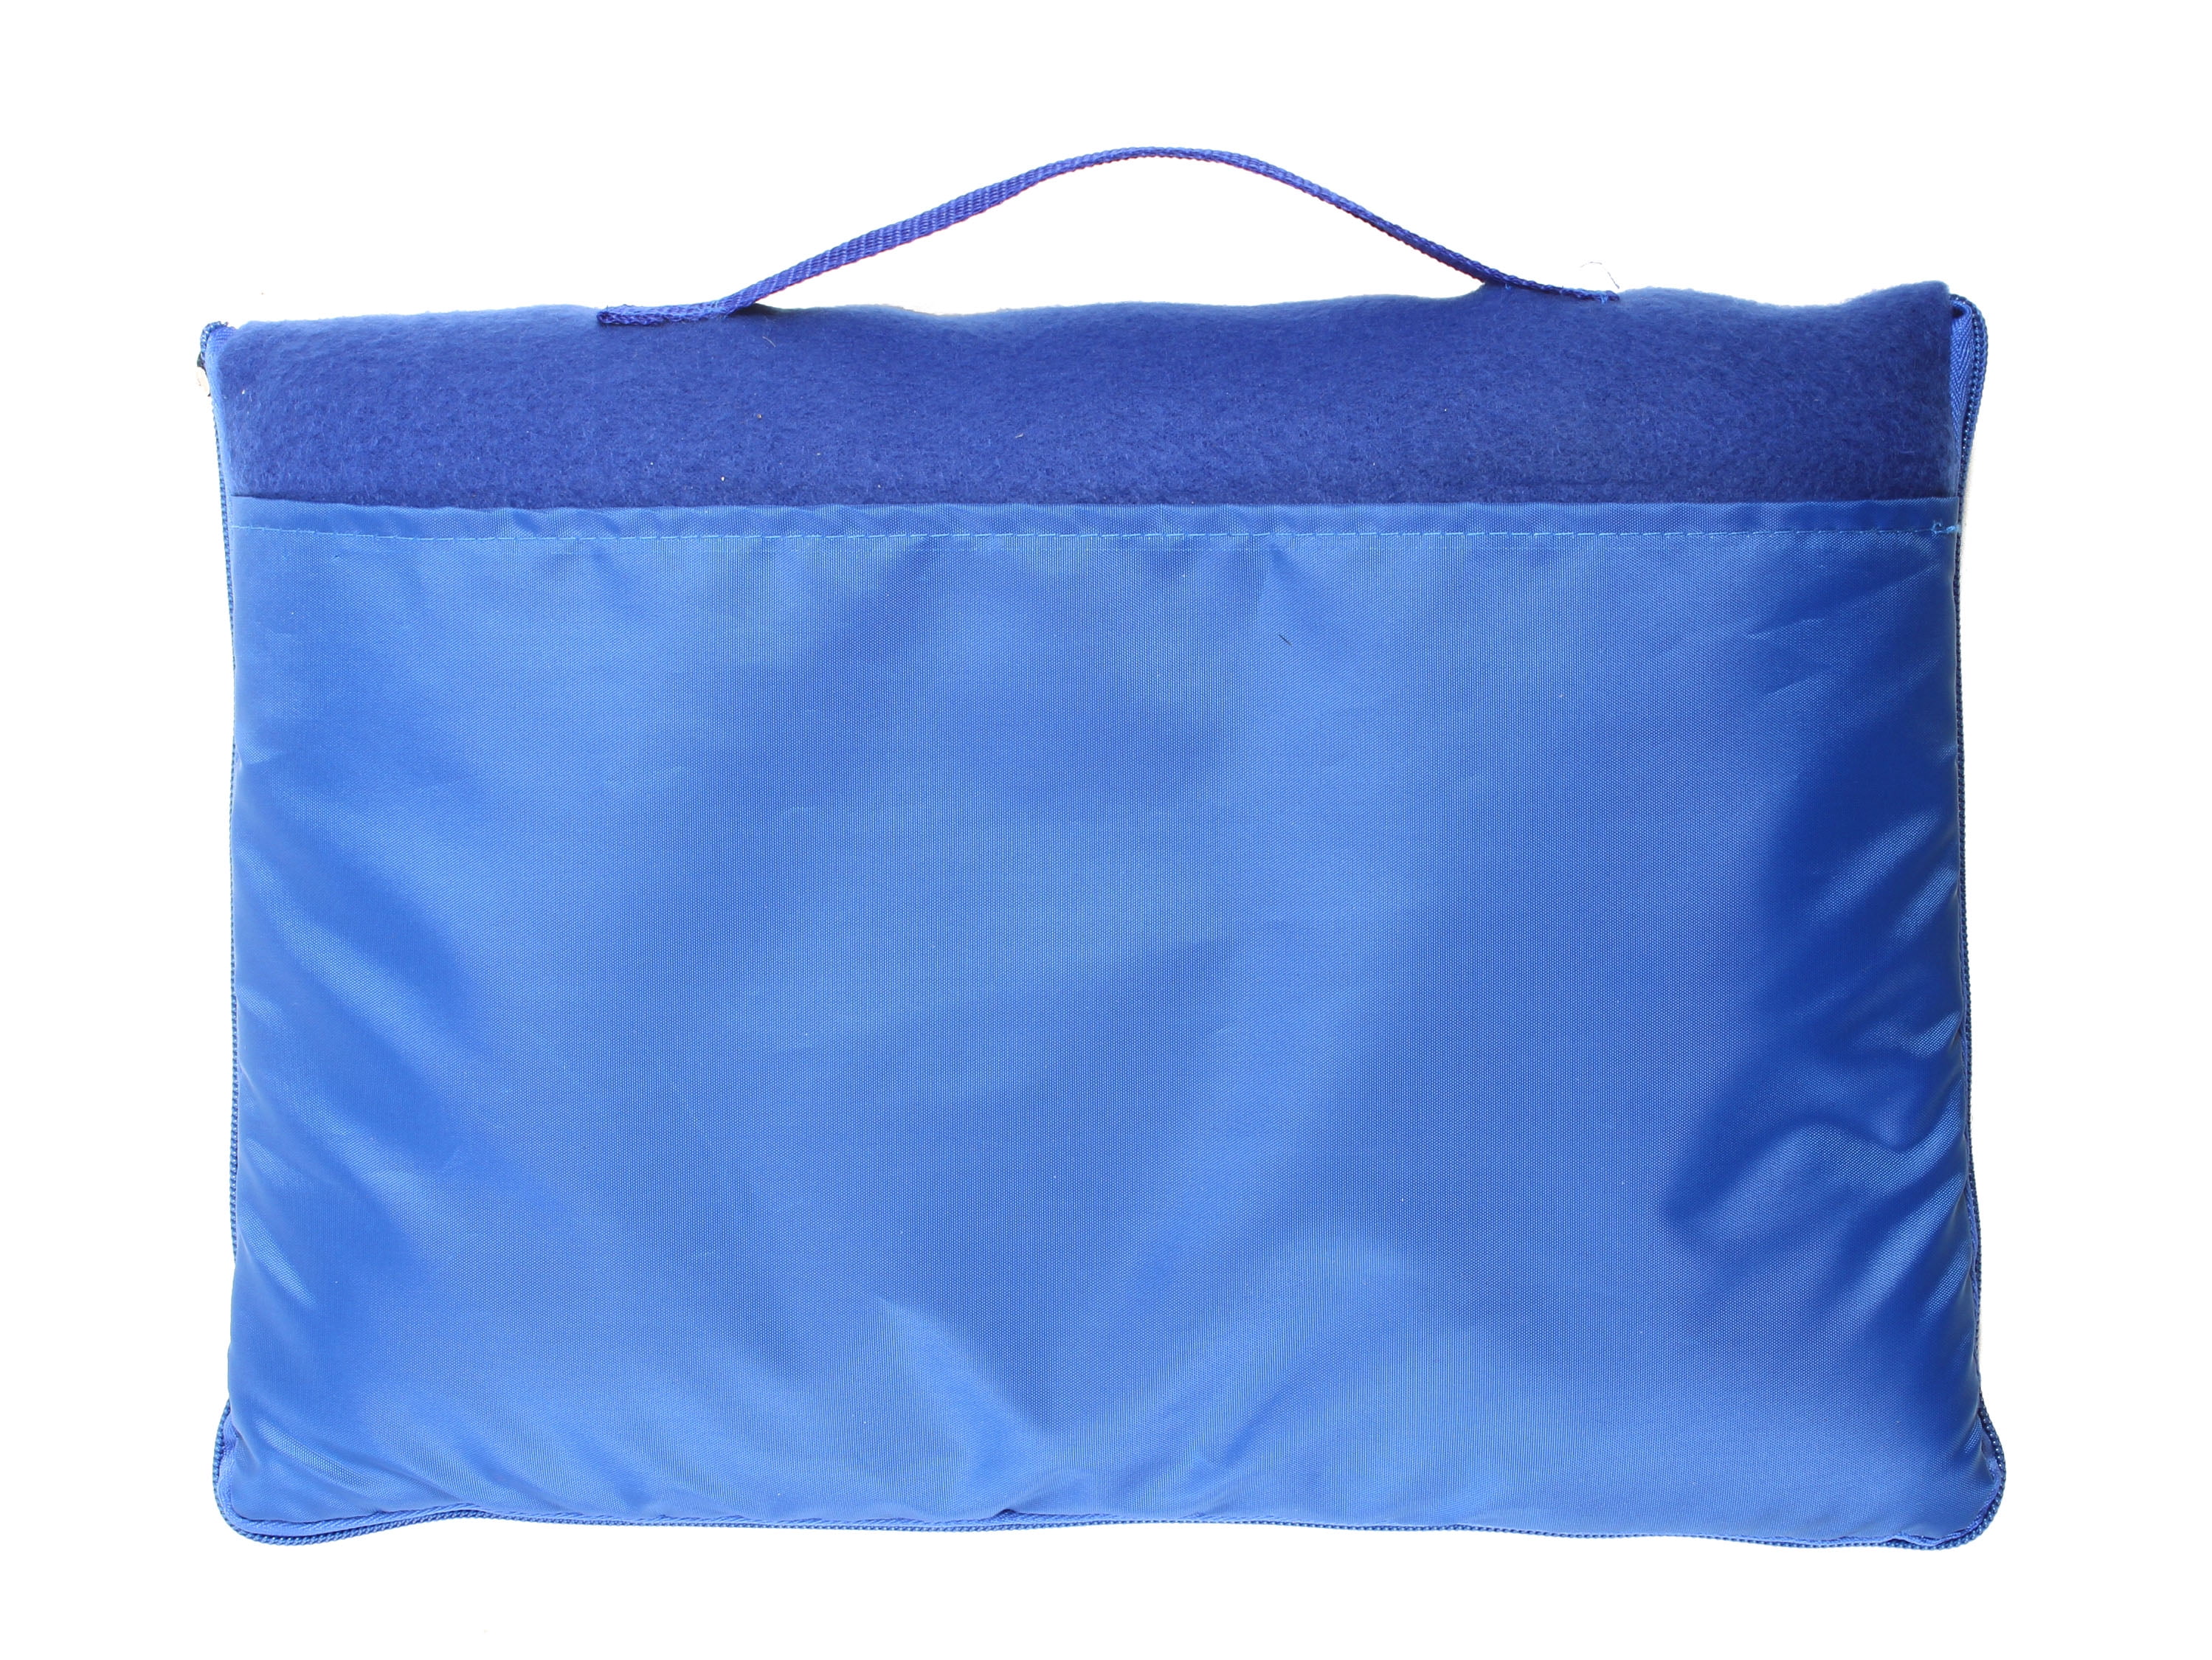 Warm Blanket Throw Transforms into a bag with a pocket and Grab Handle ...